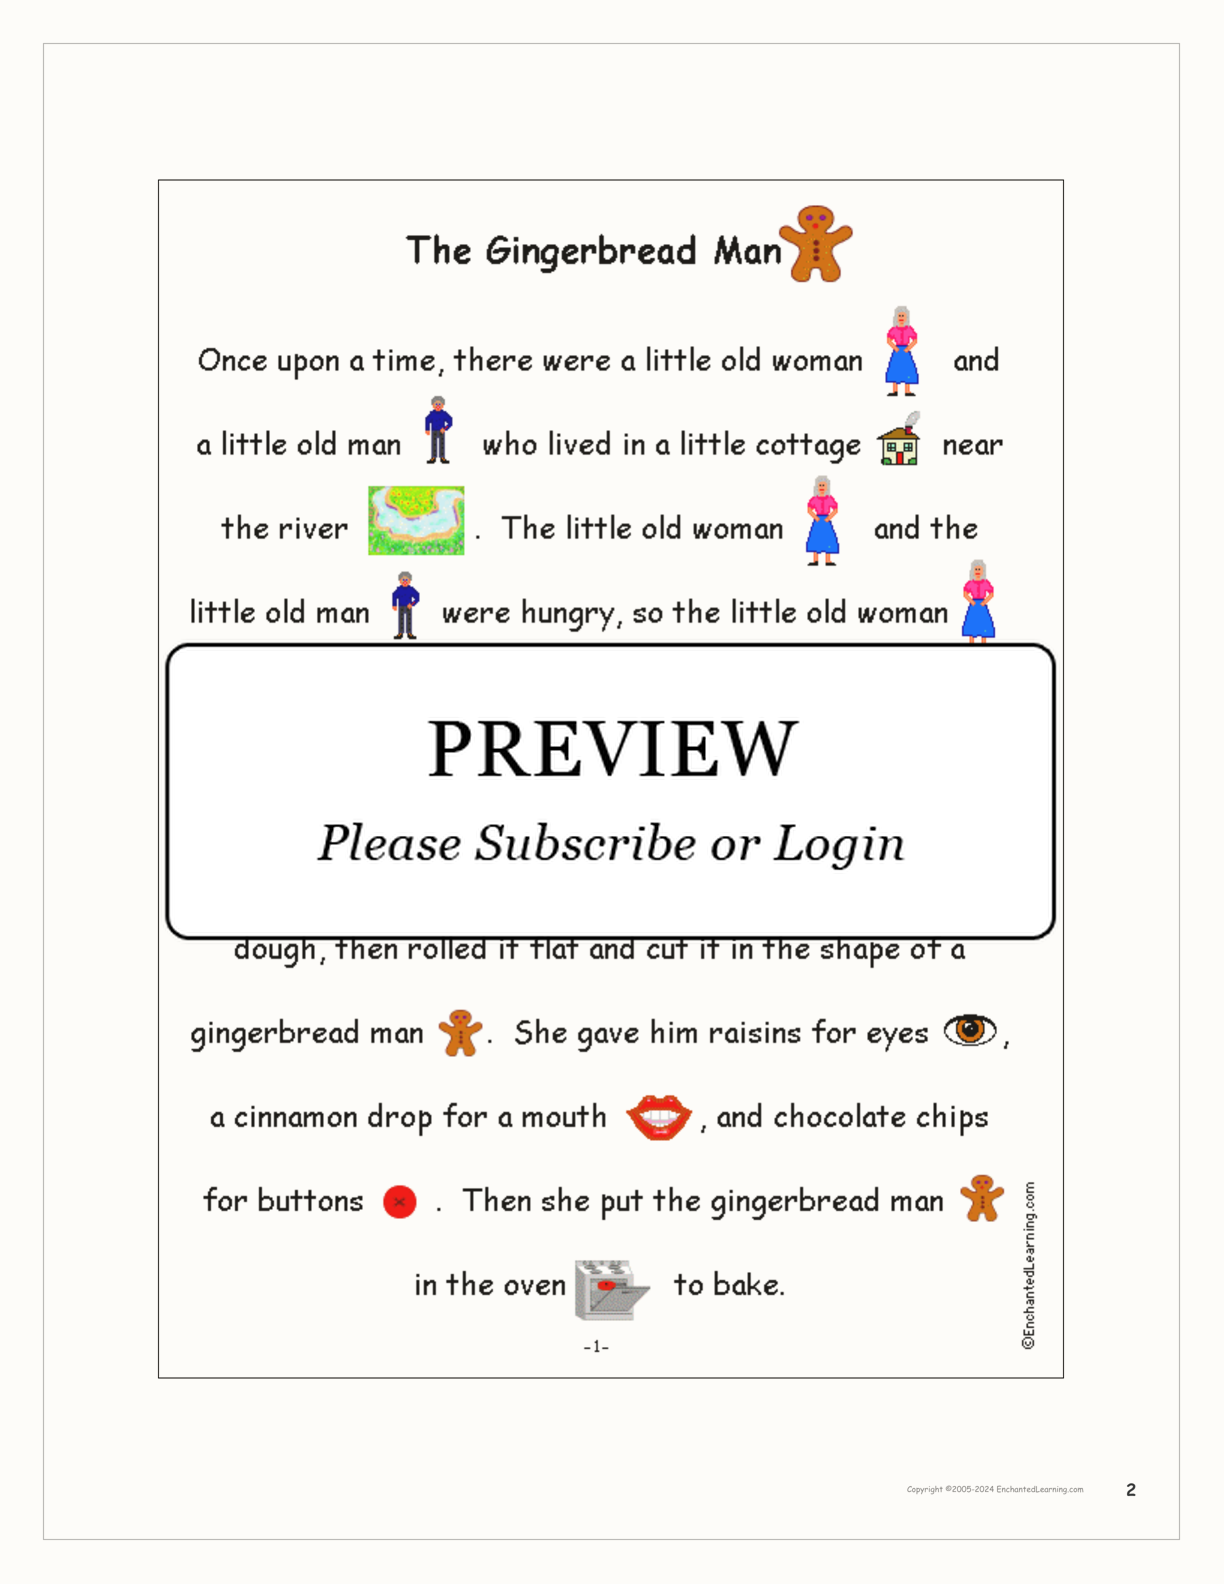 'The Gingerbread Man' Book interactive printout page 2